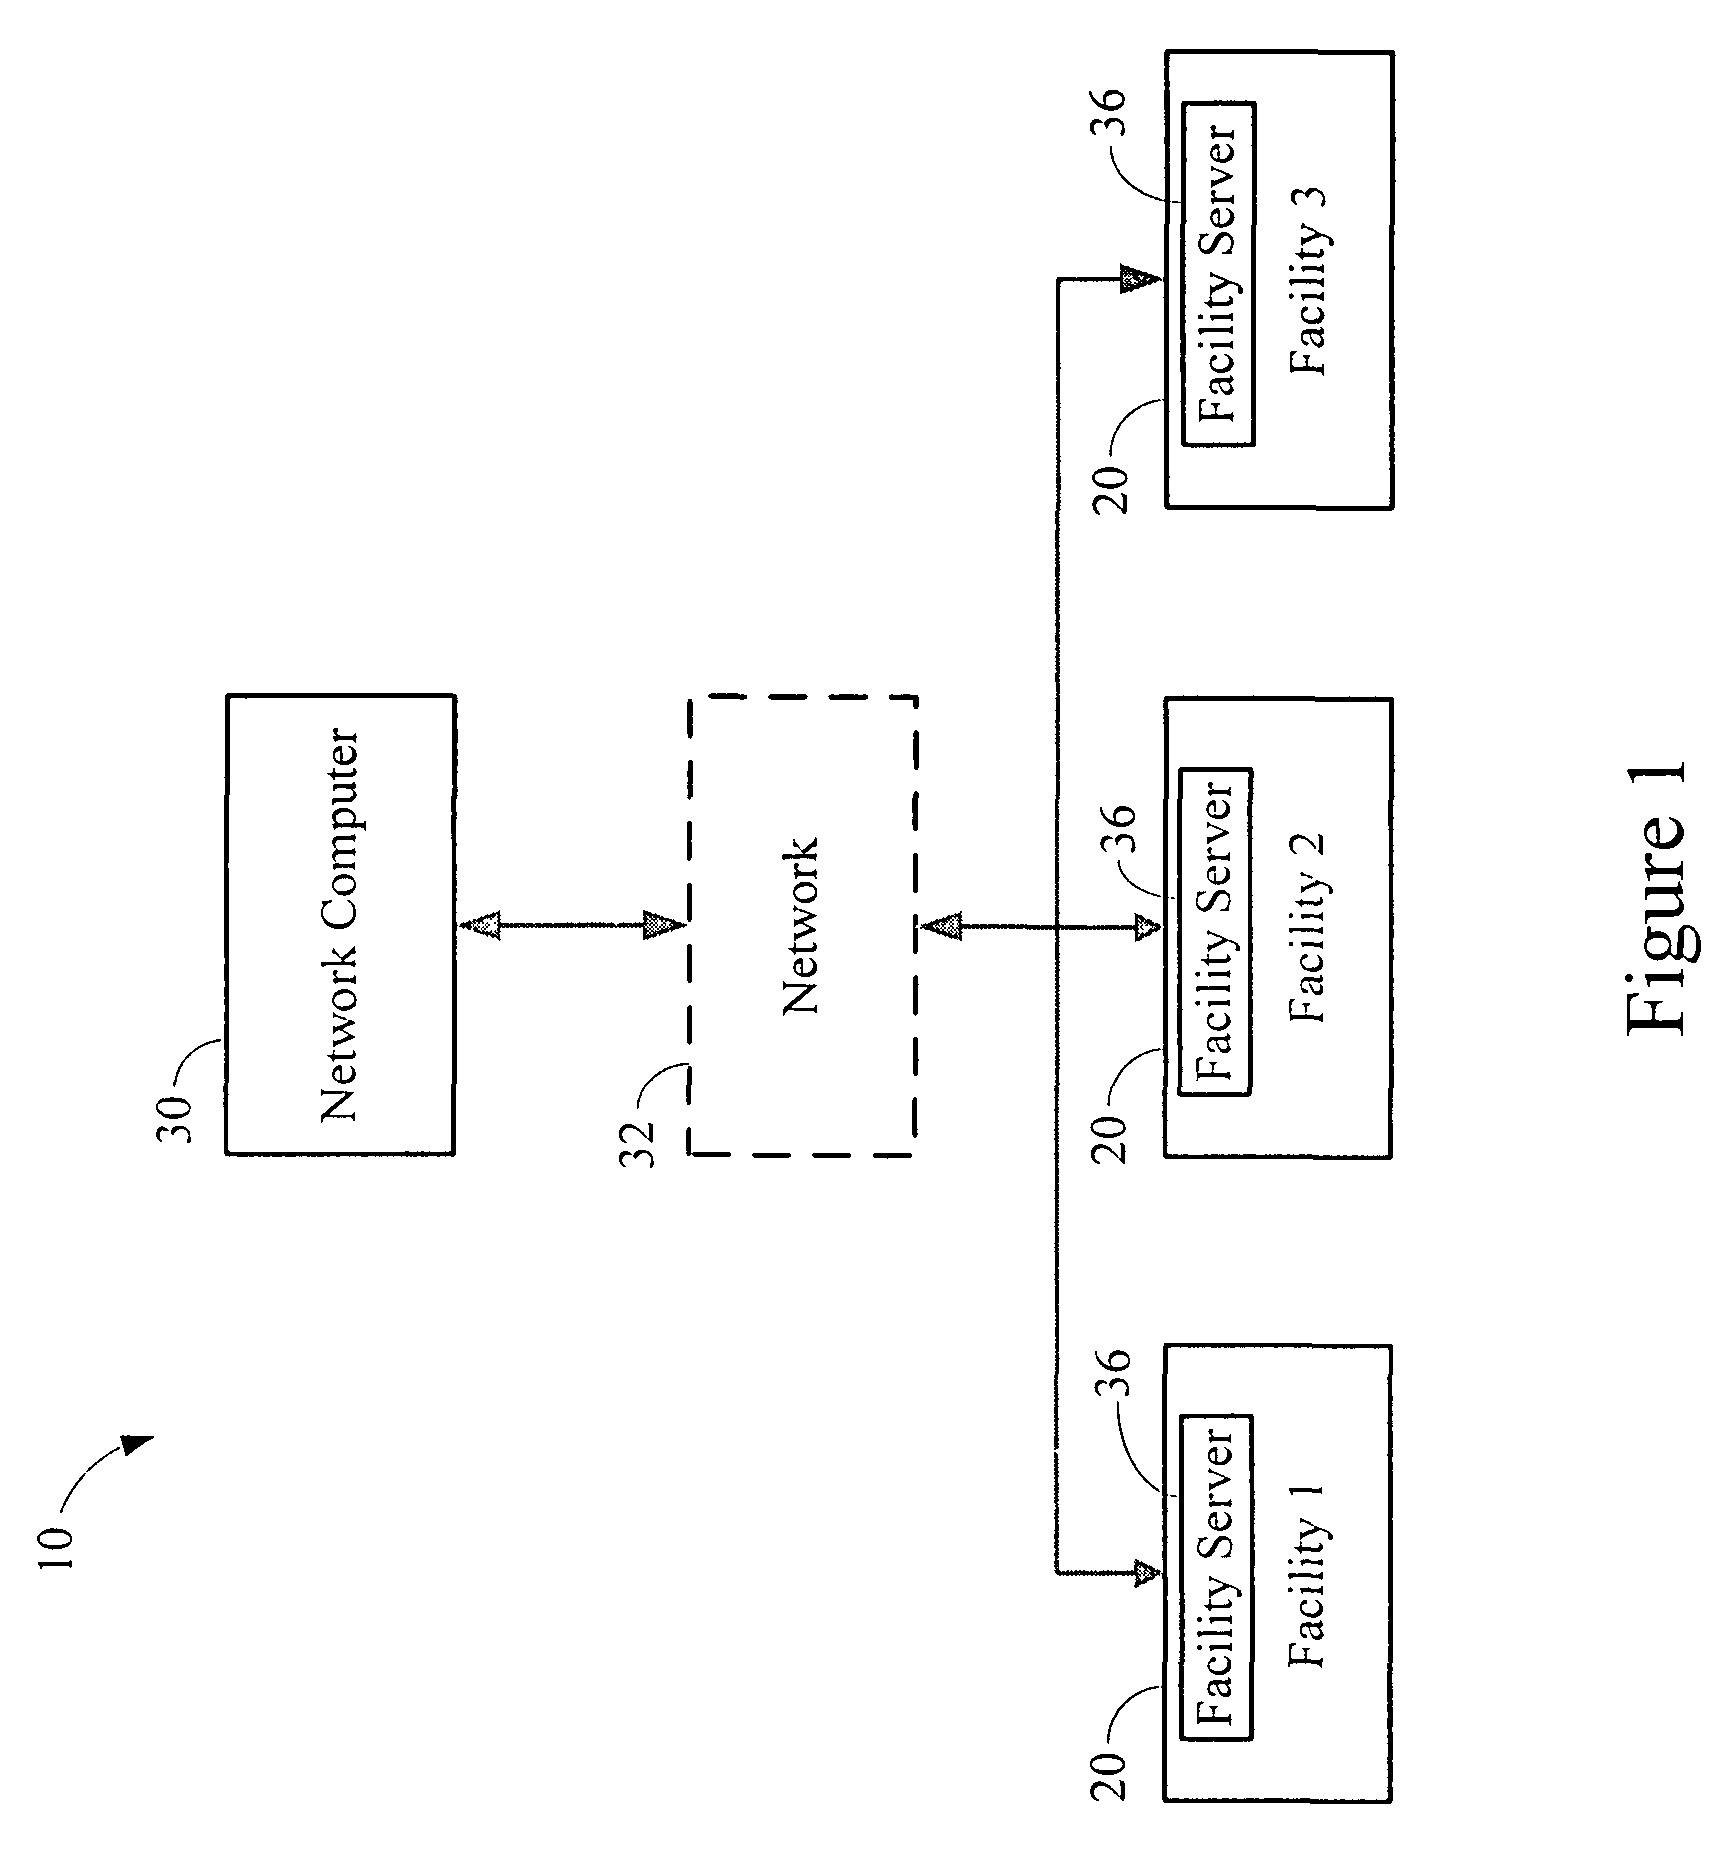 System and method for automatically switching prescriptions in a retail pharmacy to a new generic drug manufacturer